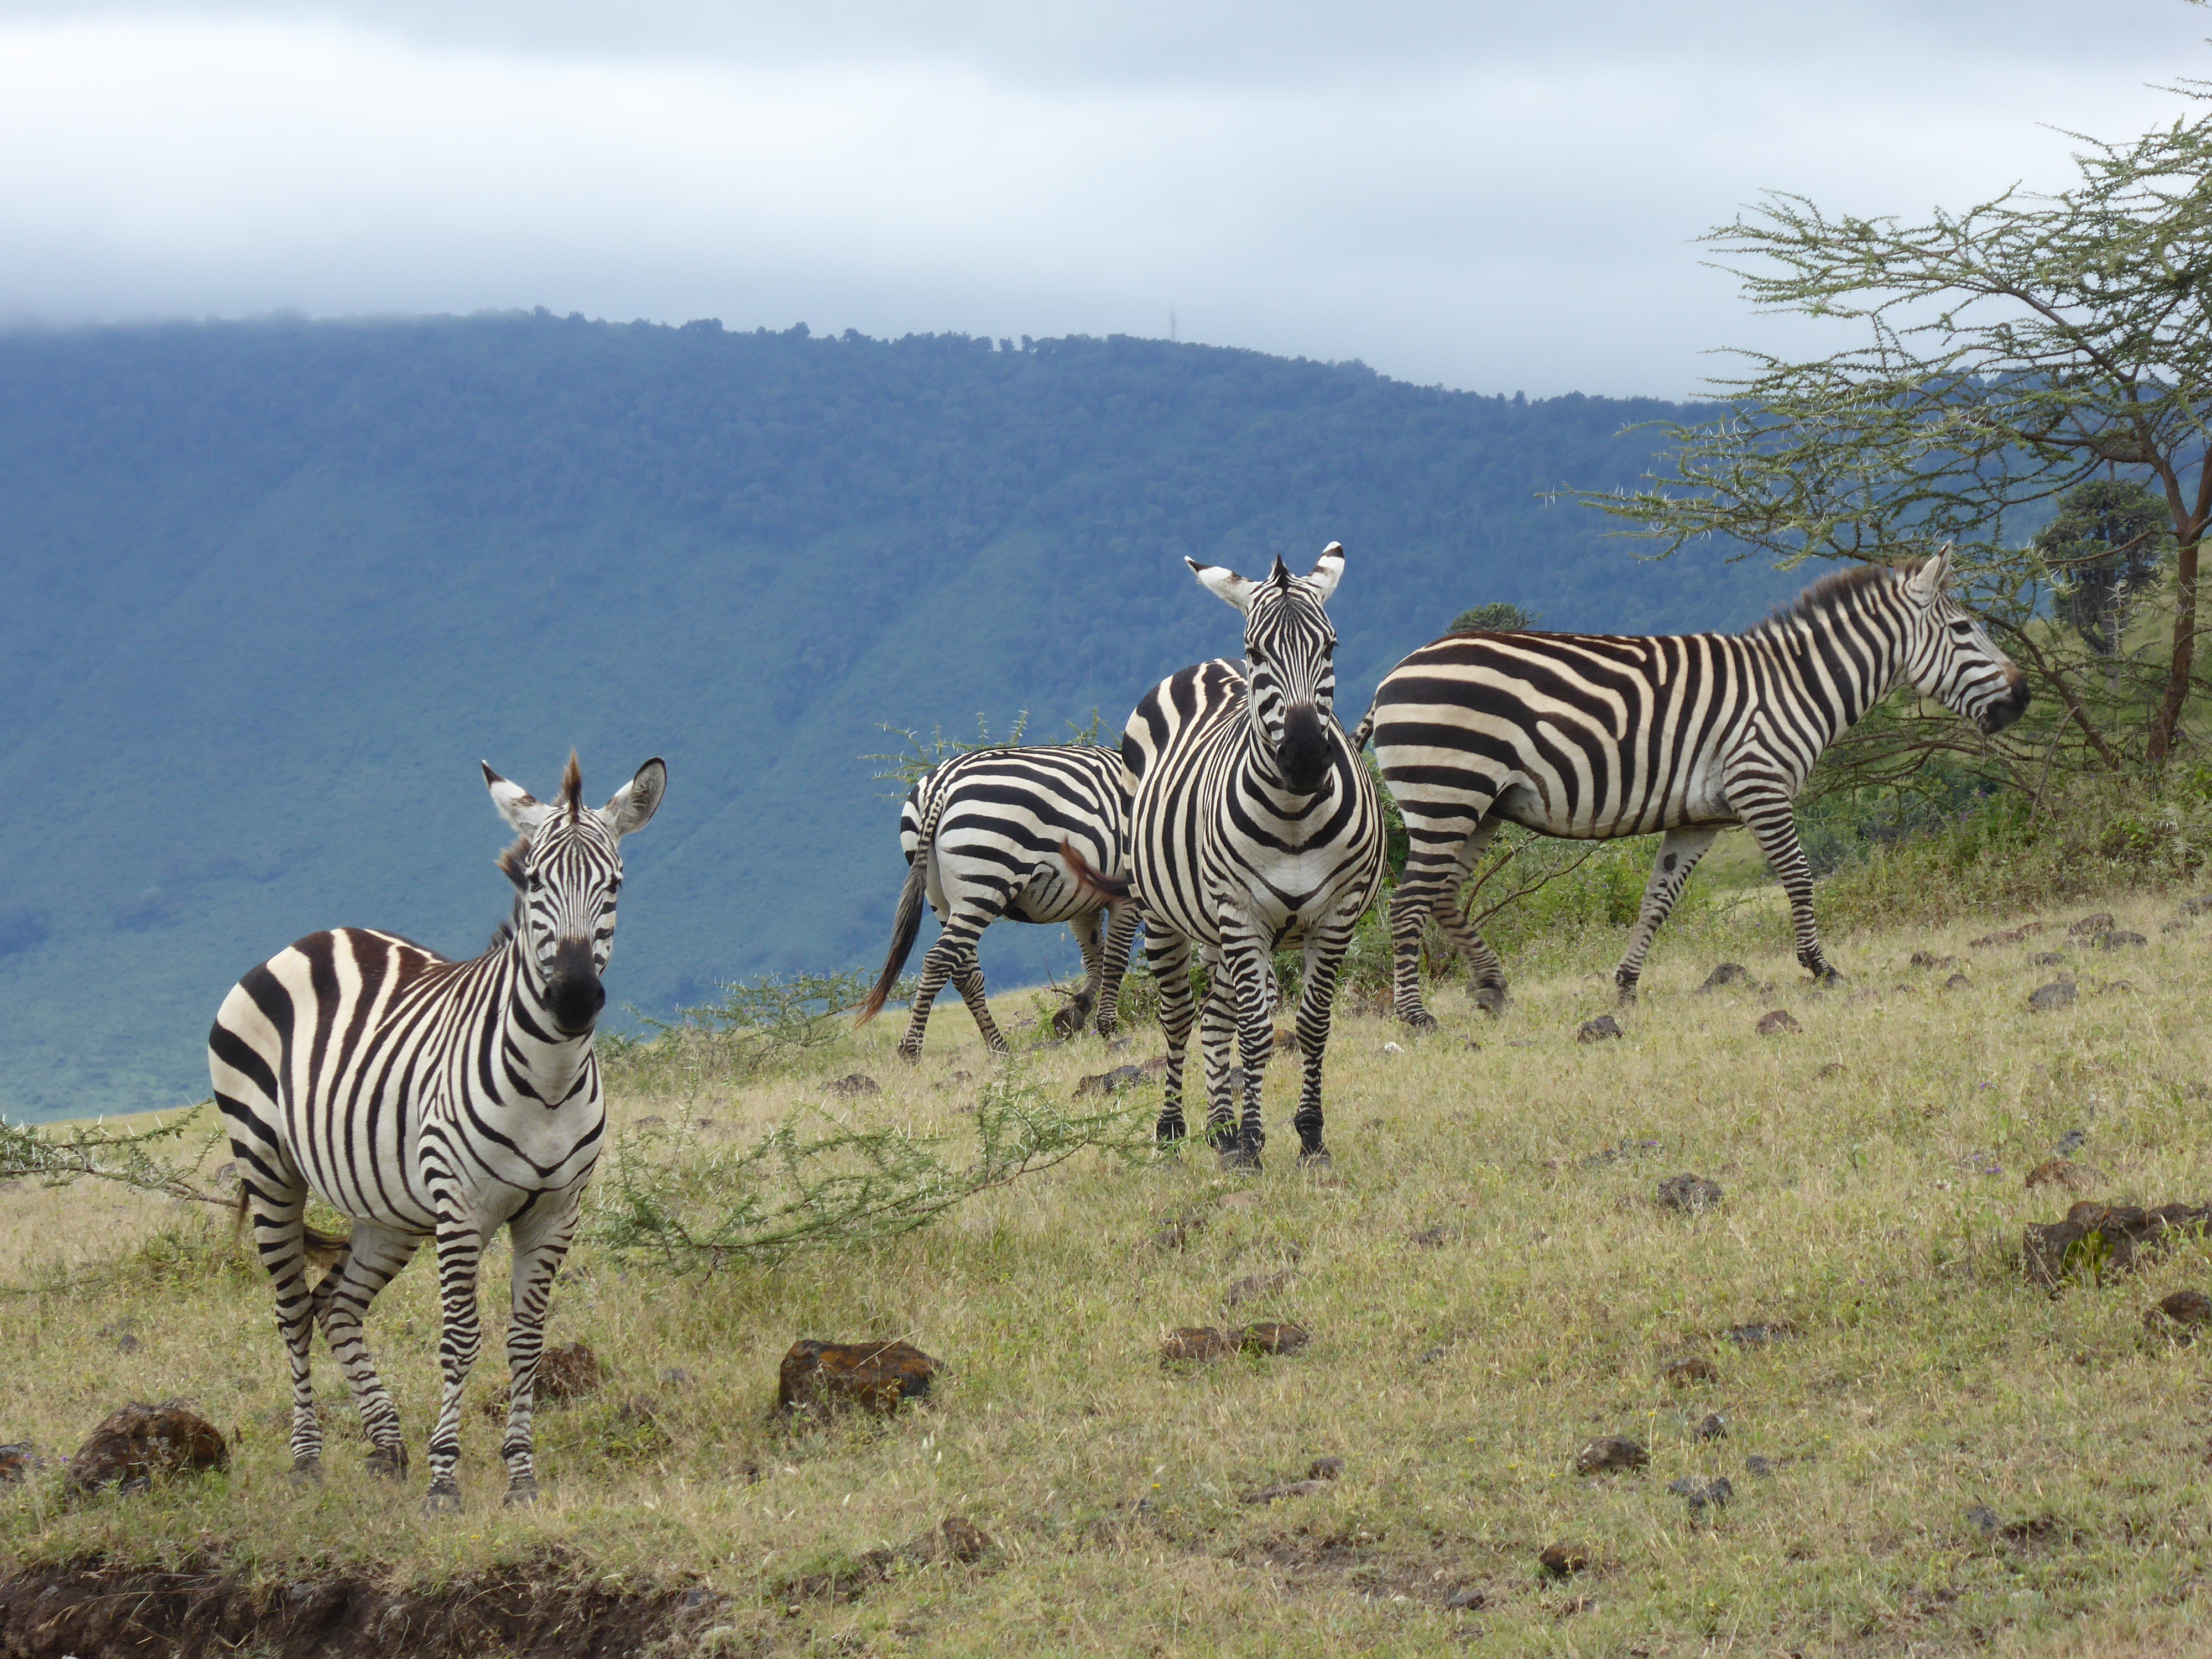 A SAFARI IN KENYA: 16 ANIMALS YOU CAN EXPECT TO SEE